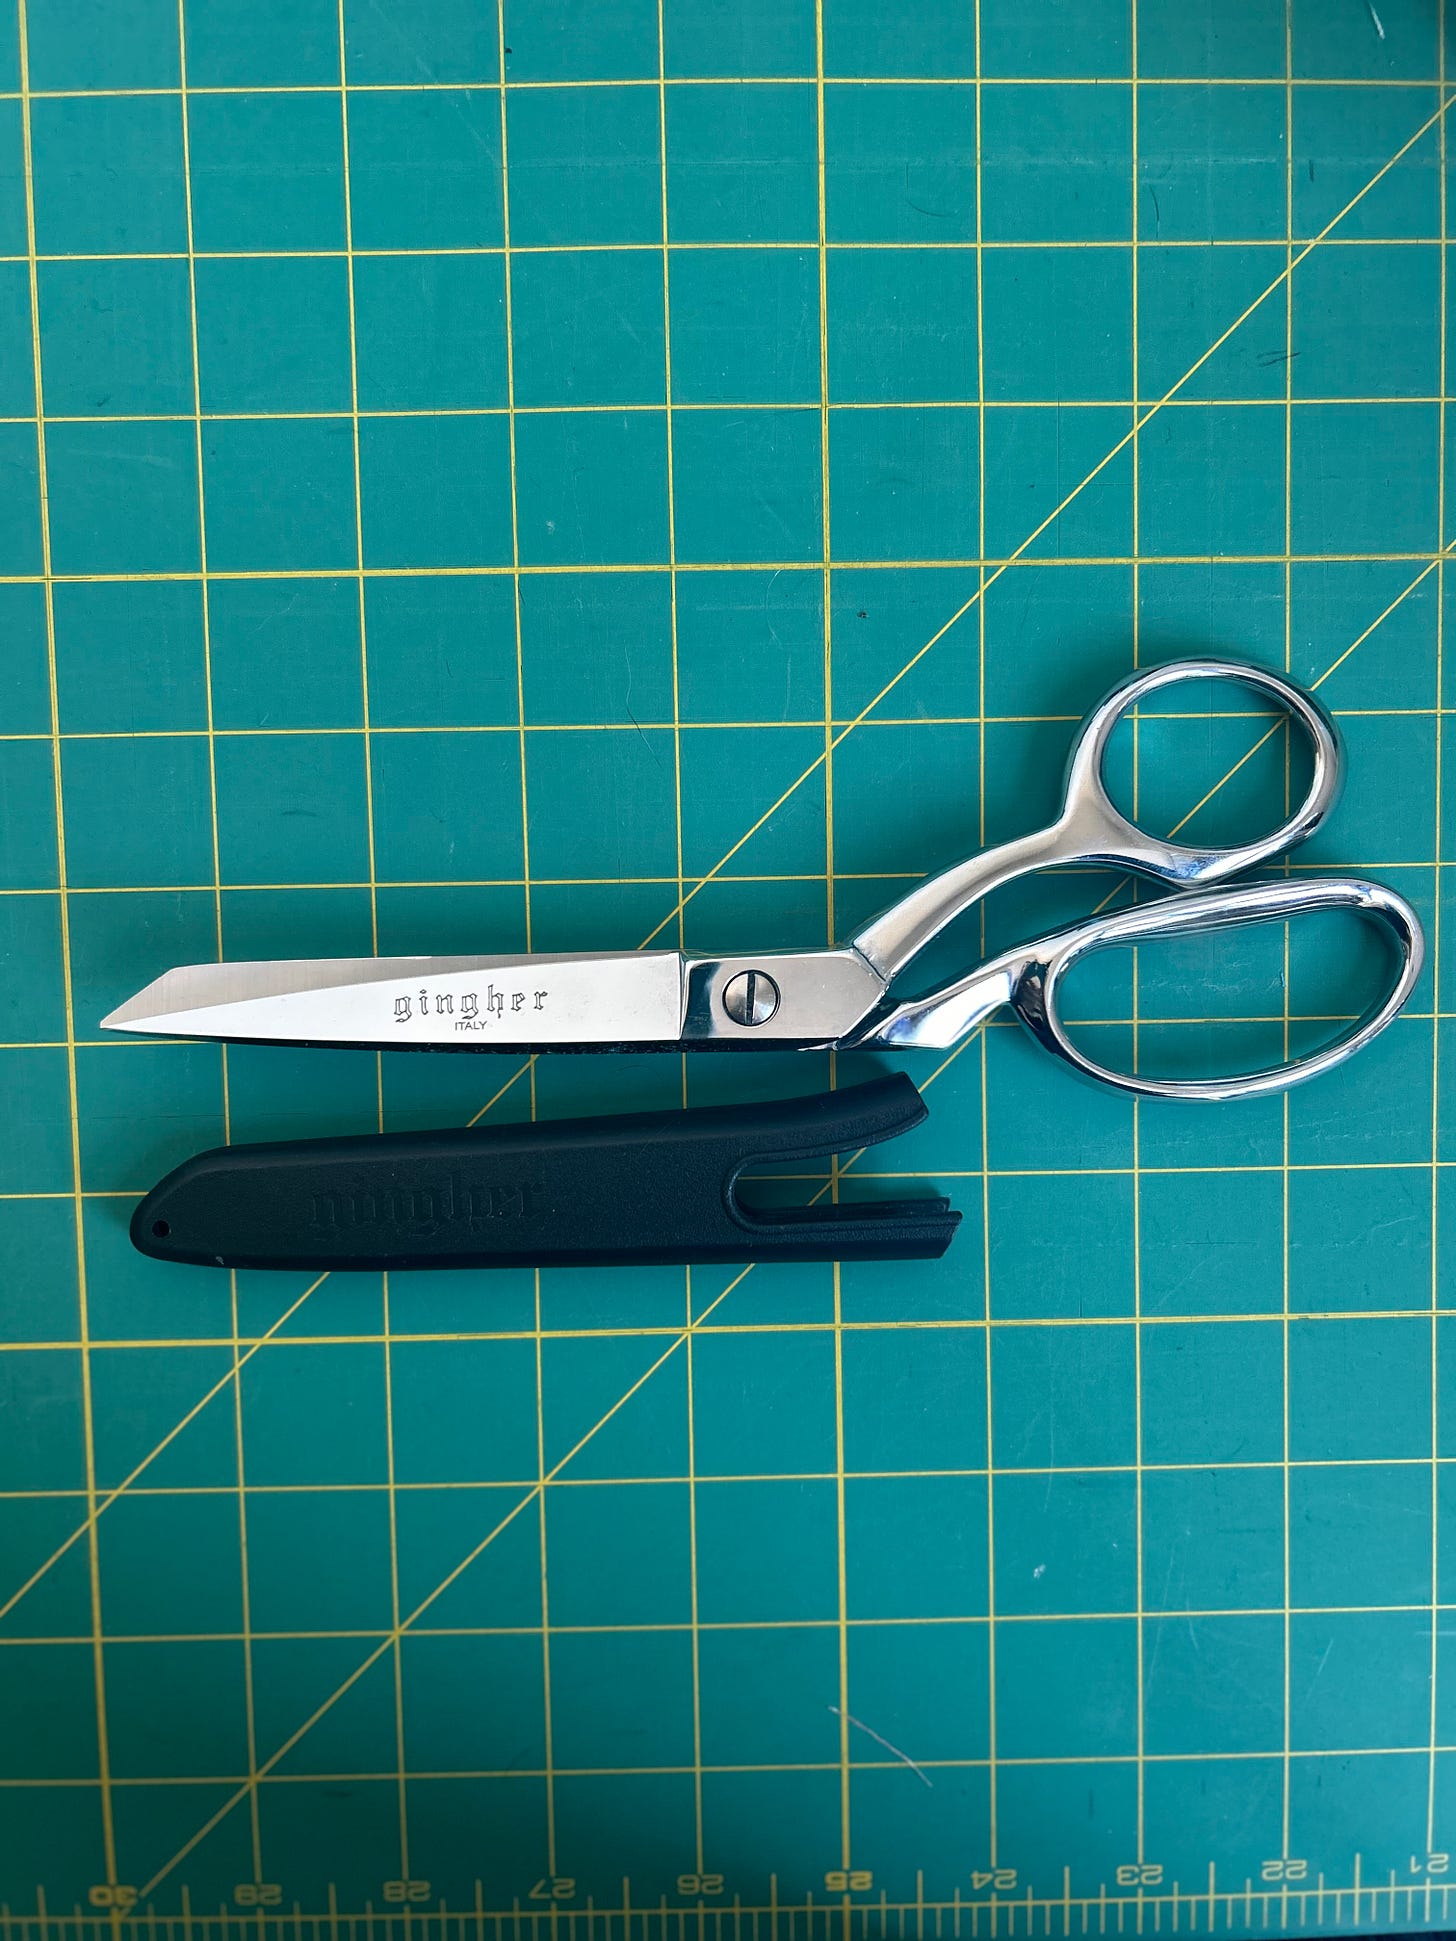 A pair of Gingher fabric scissors on a green background